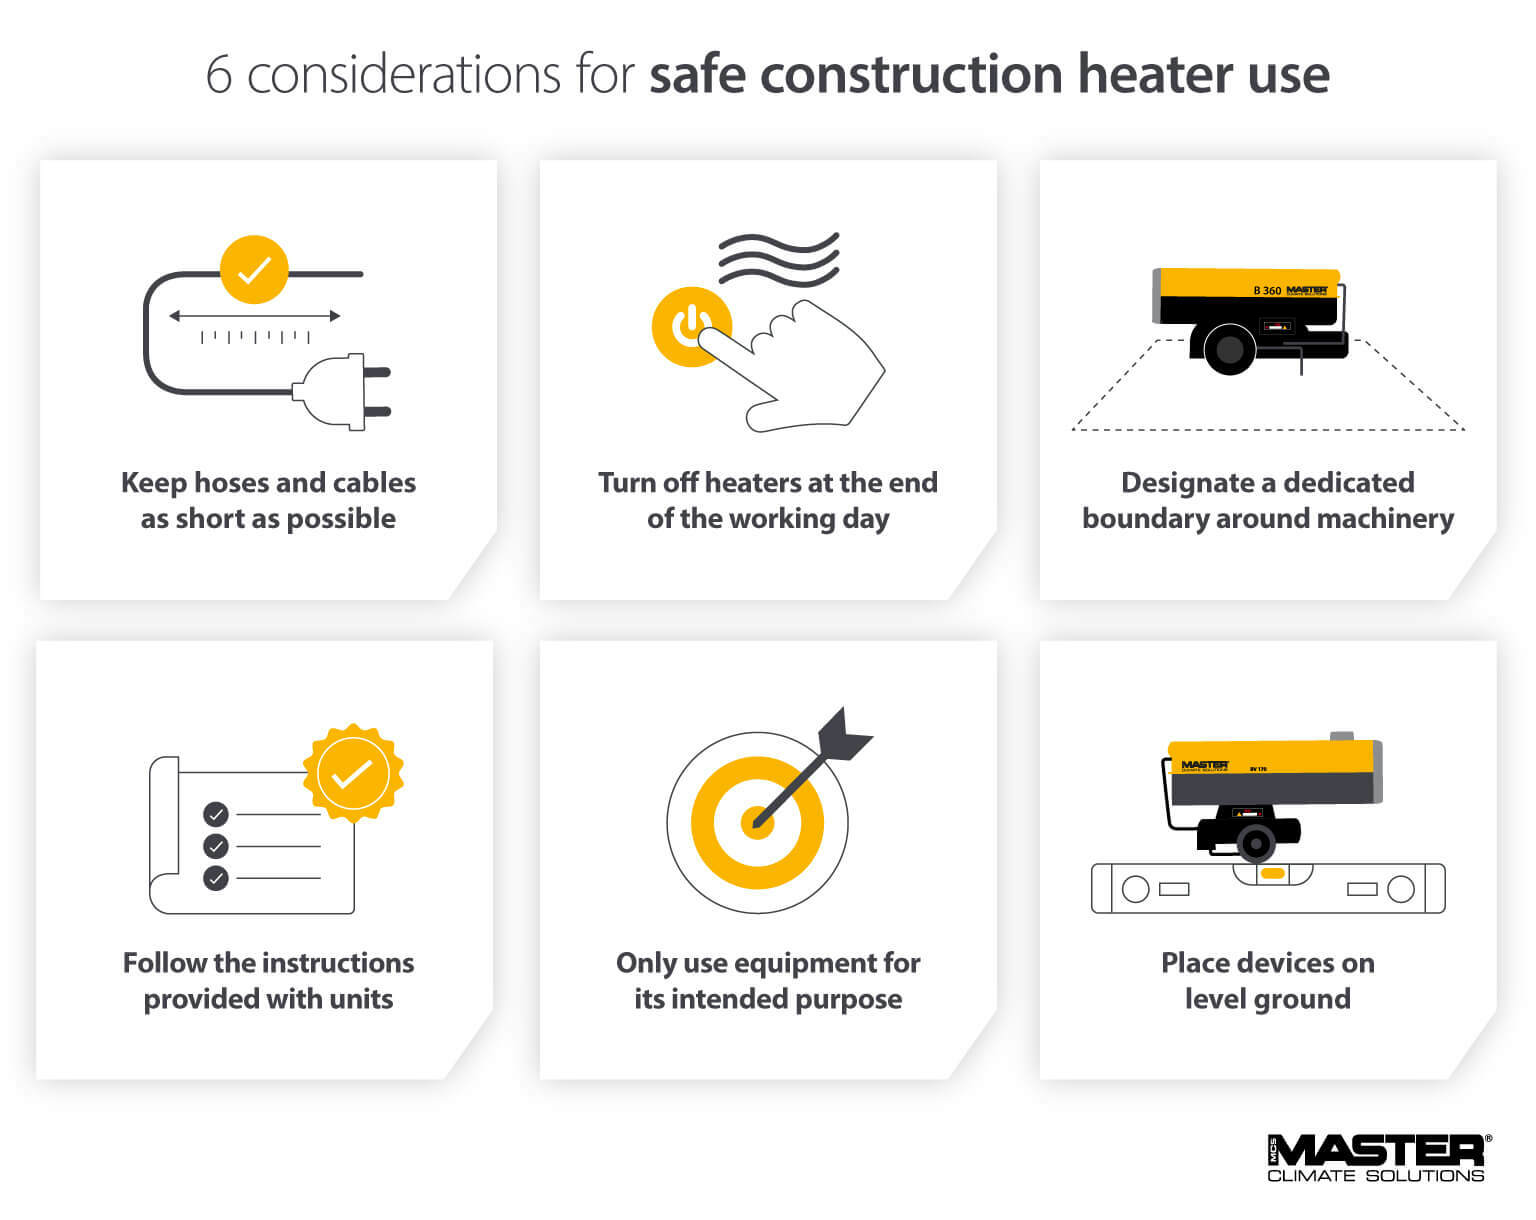 How to use heaters on construction sites safely - Infographic image